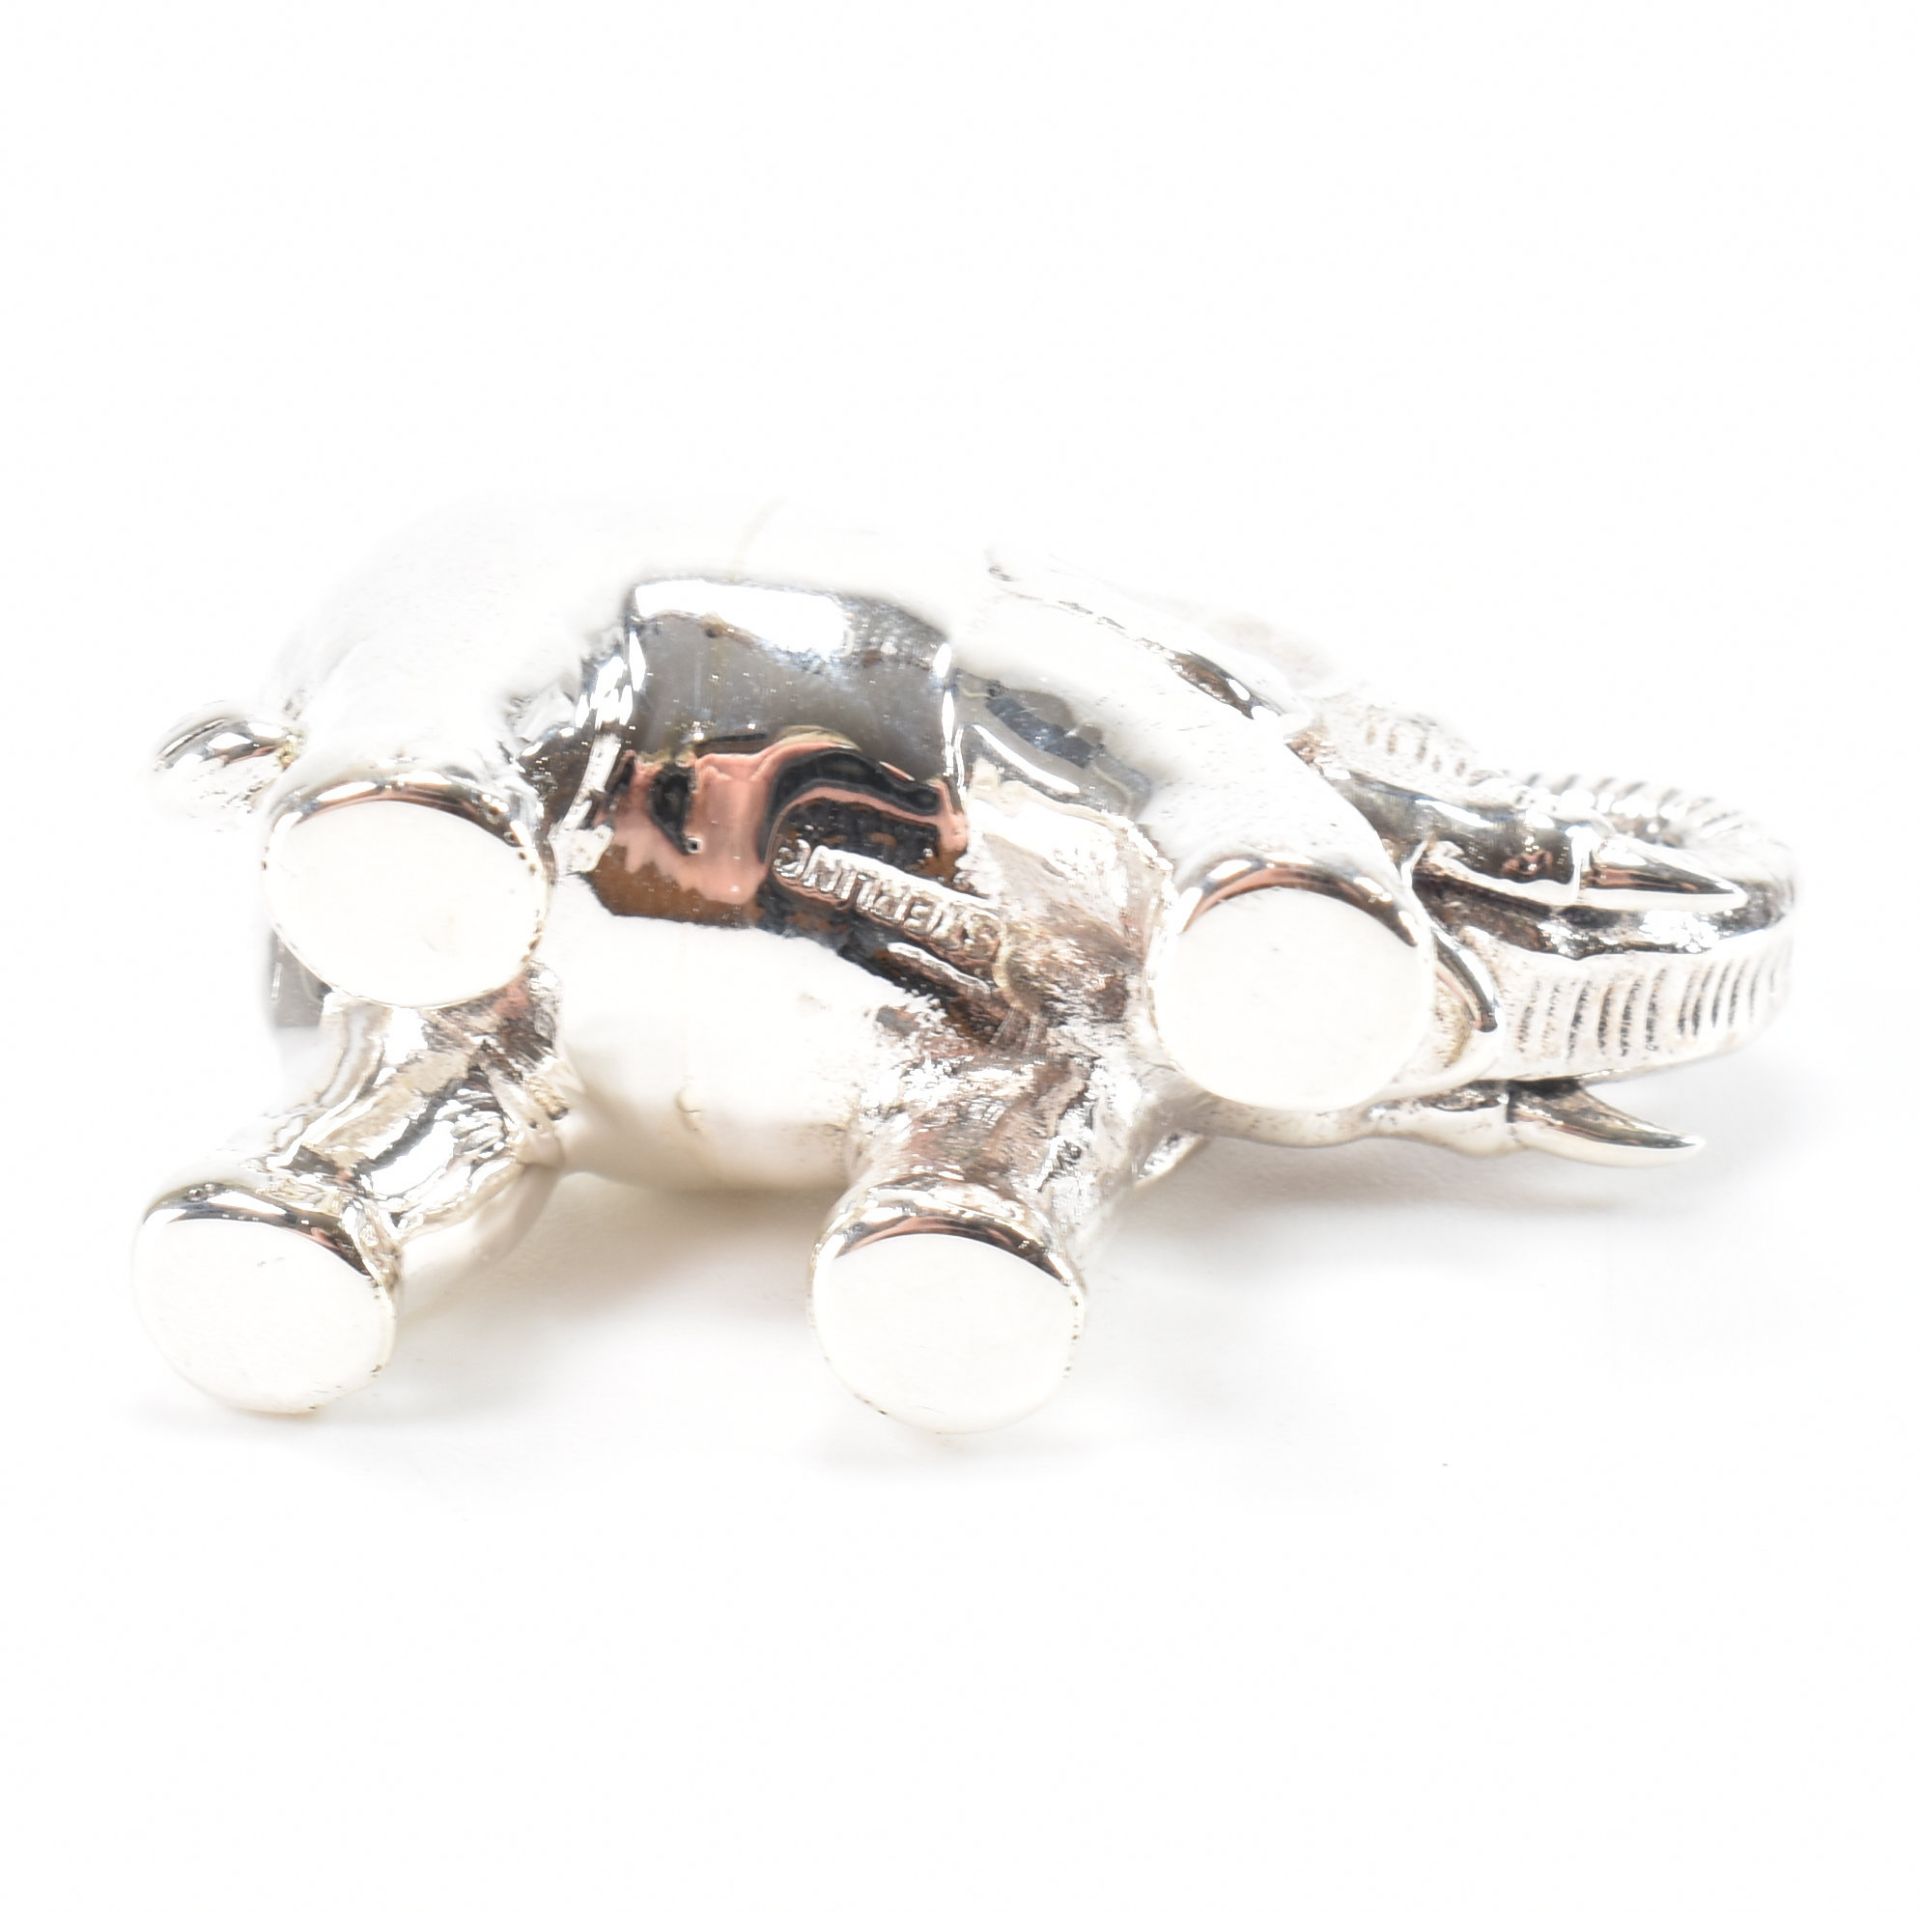 STERLING SILVER ELEPHANT FIGURINE - Image 3 of 3